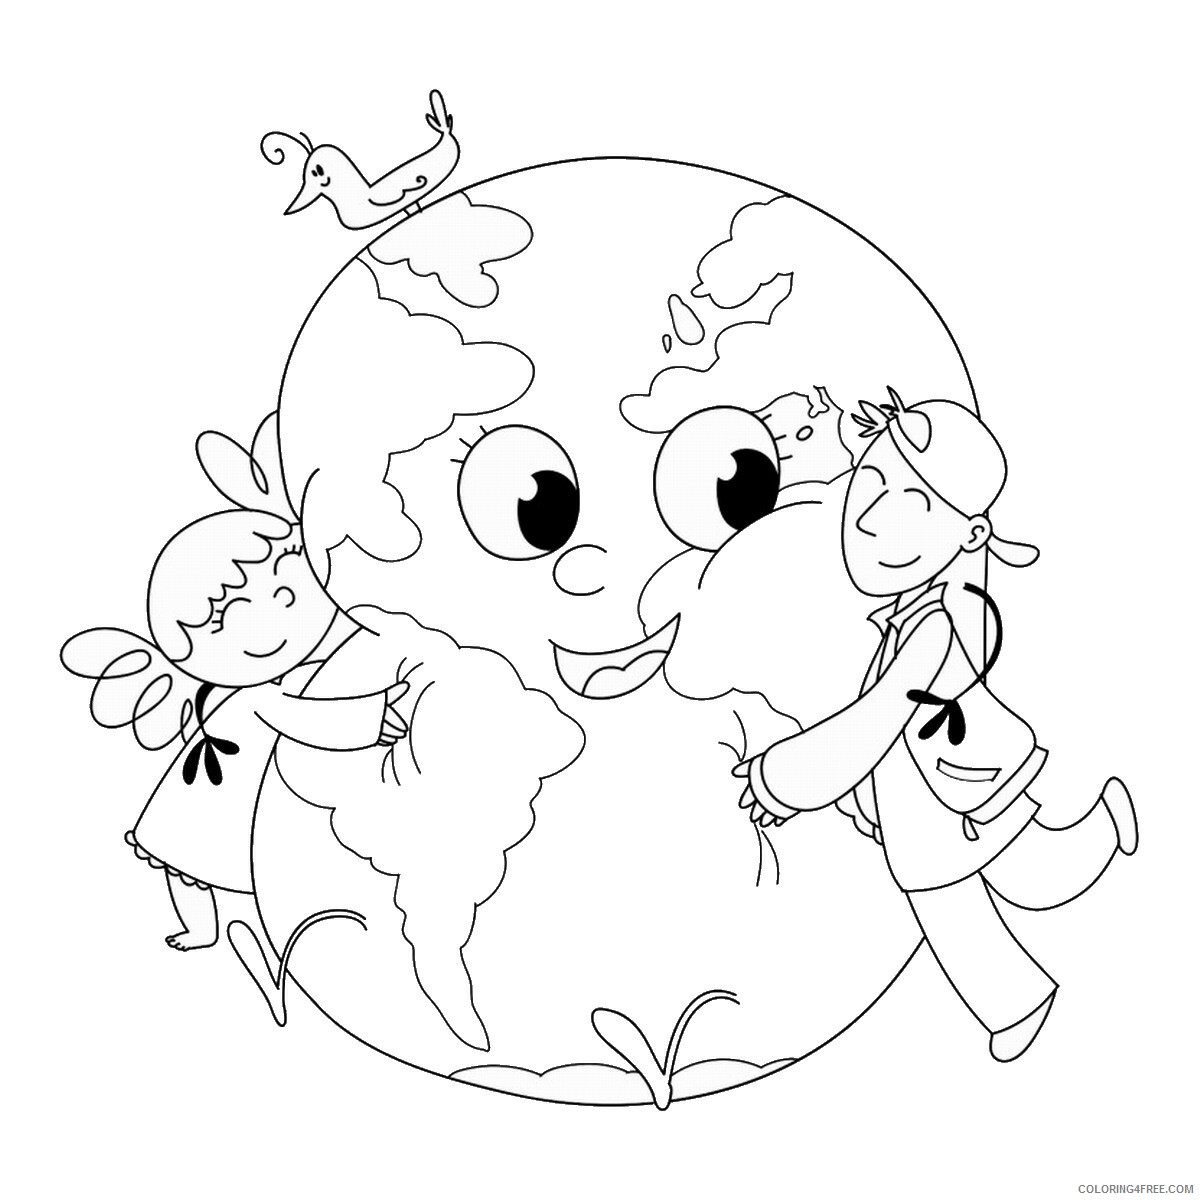 Earth Day Coloring Pages Holiday earth_day_coloring18 Printable 2021 0187 Coloring4free